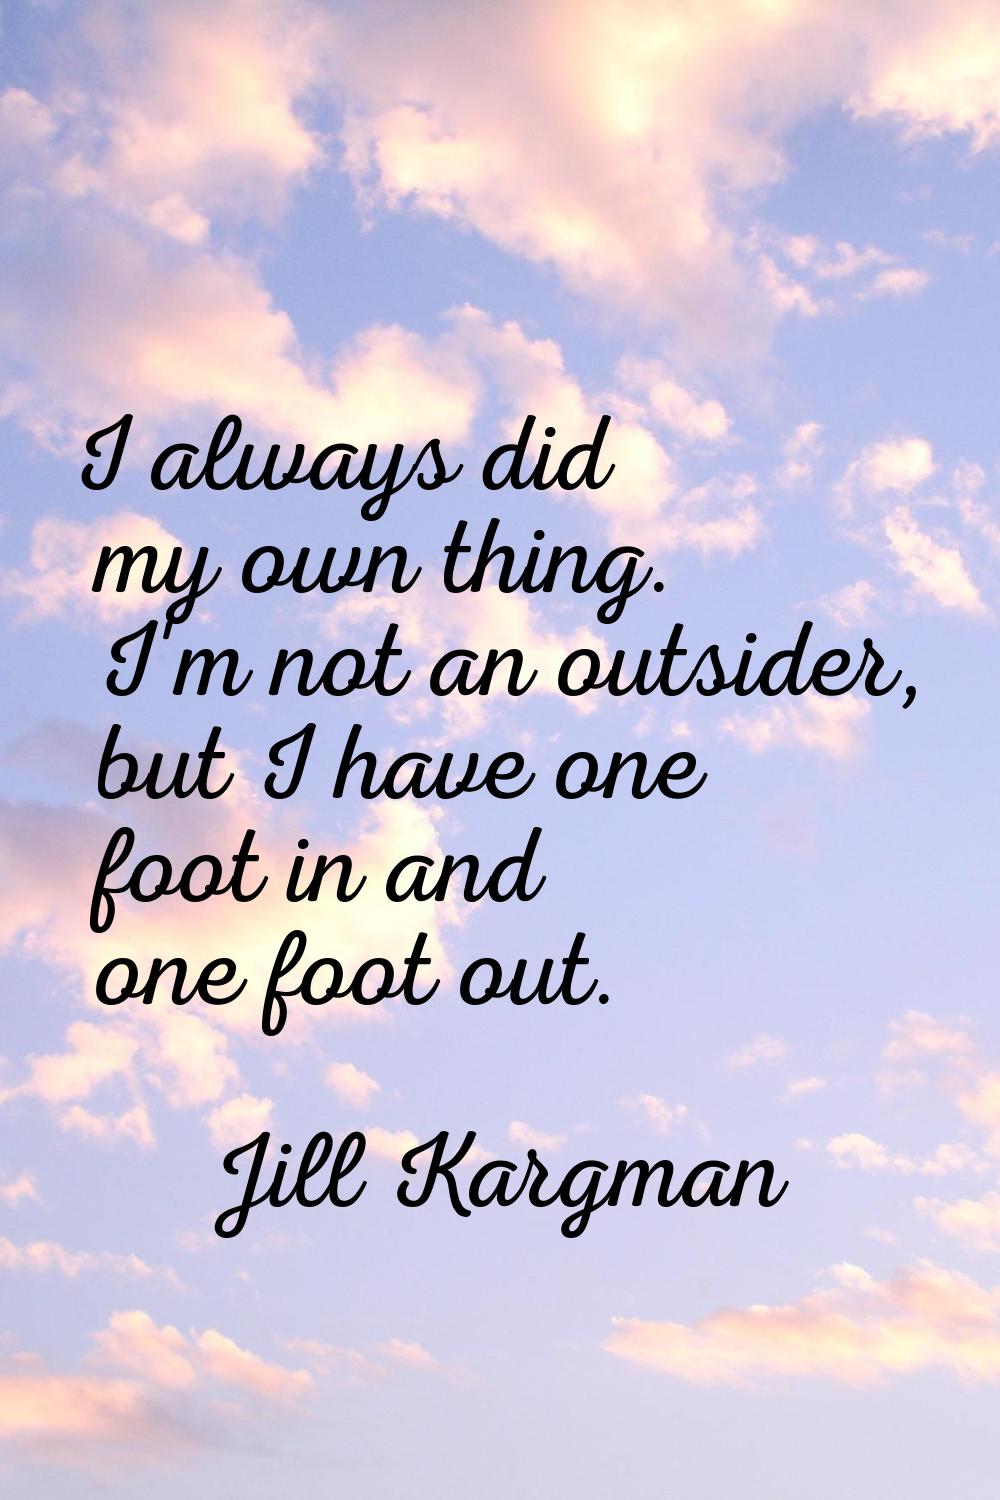 I always did my own thing. I'm not an outsider, but I have one foot in and one foot out.